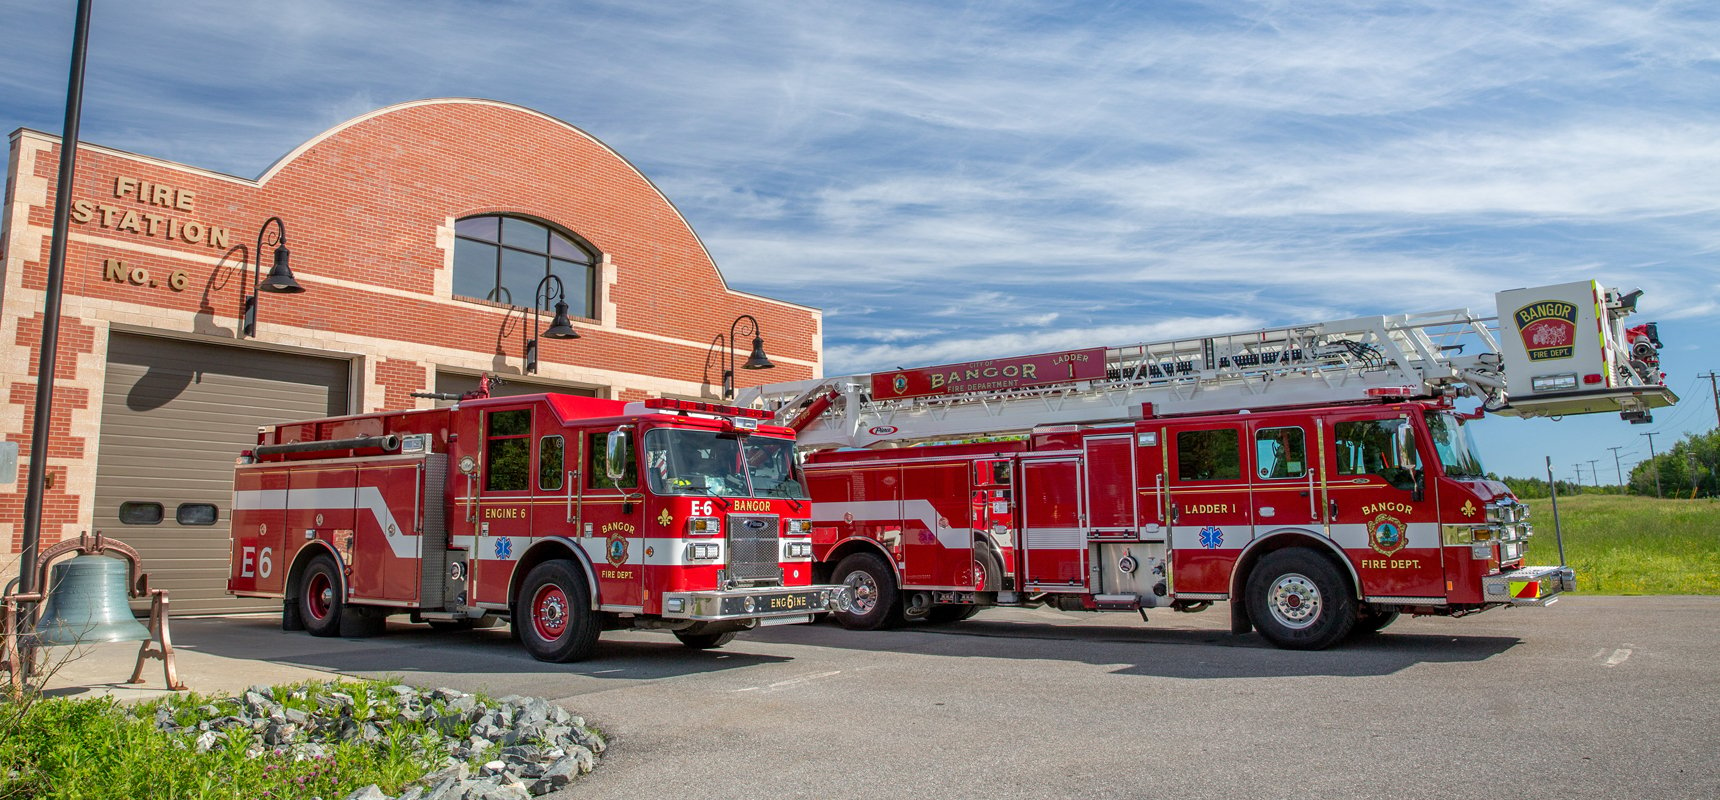 Used Fire Truck Apparatus